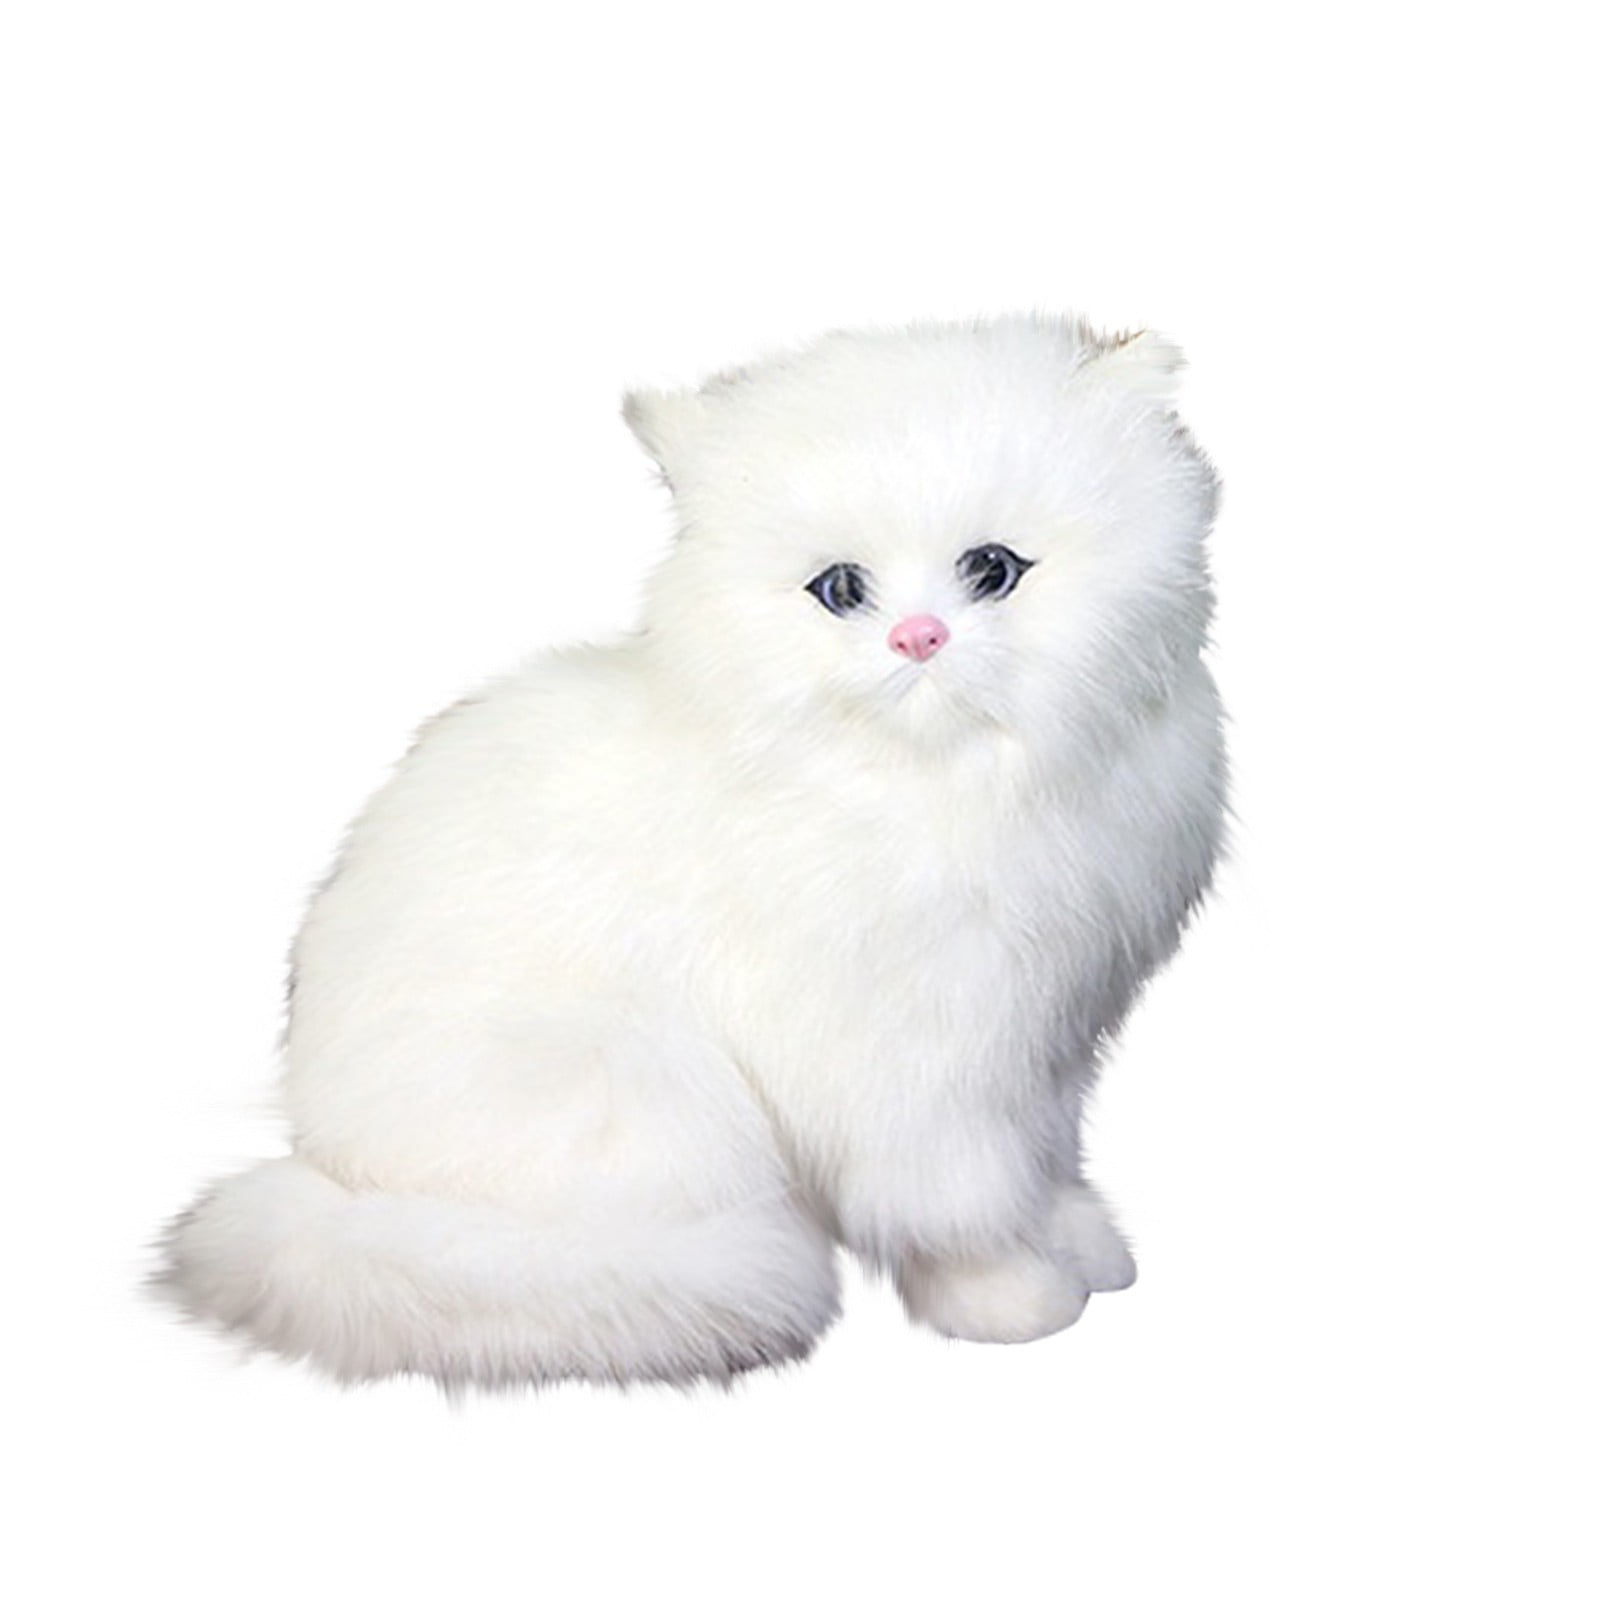 Details about   Cute Cat Plush Doll Lifelike Simulation Soft Toy Kid Birthday Xmas Gift 3 Colors 